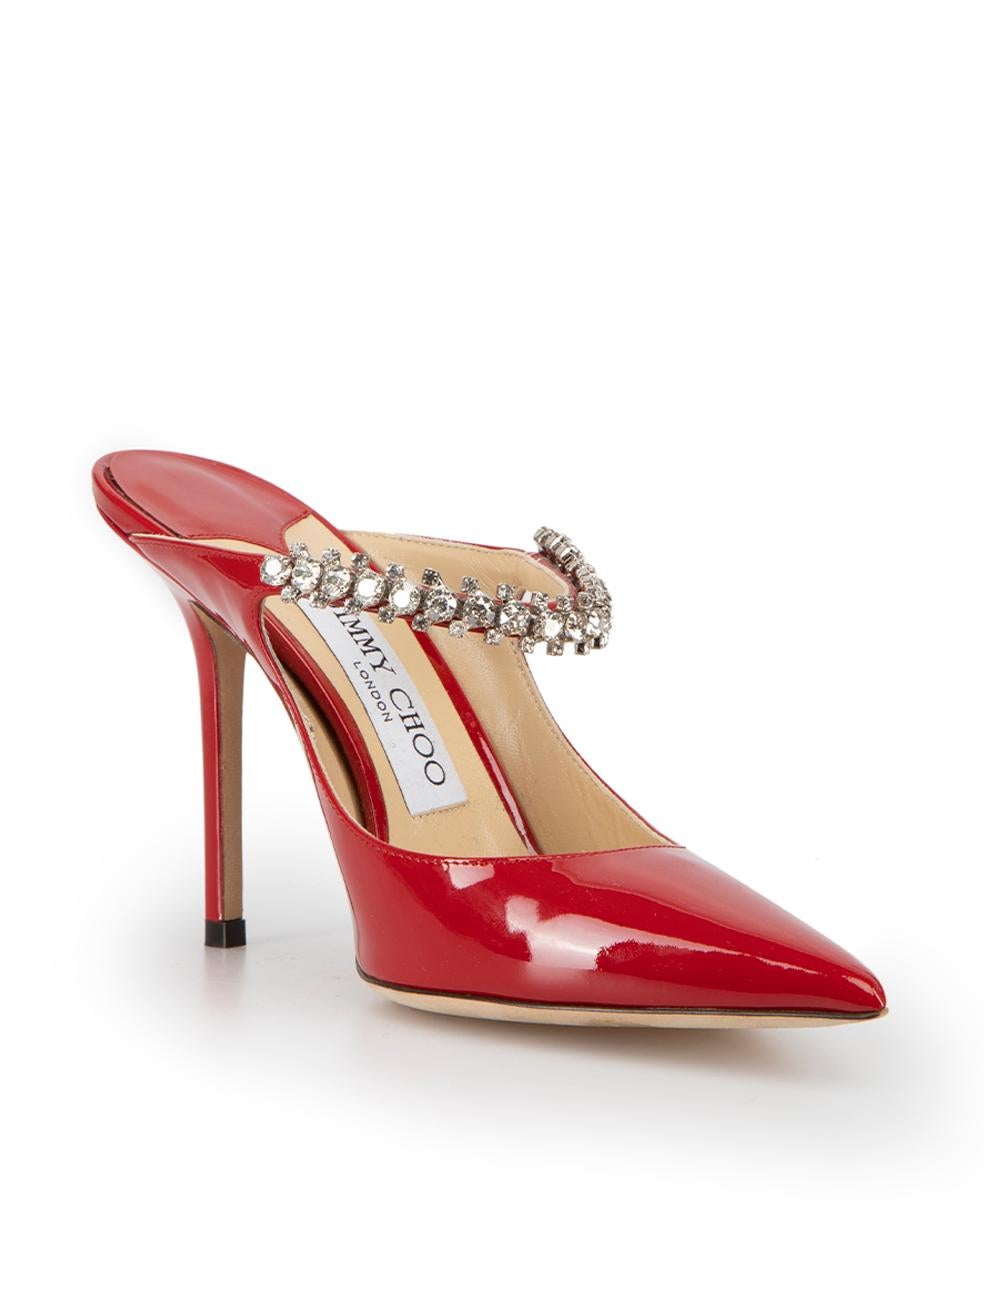 CONDITION is Very good. Hardly any visible wear to mules is evident on this used Jimmy Choo designer resale item.



Details


Red

Patent leather

Pointed toe mules

High heel

Crystal embellished strap



 

Made in